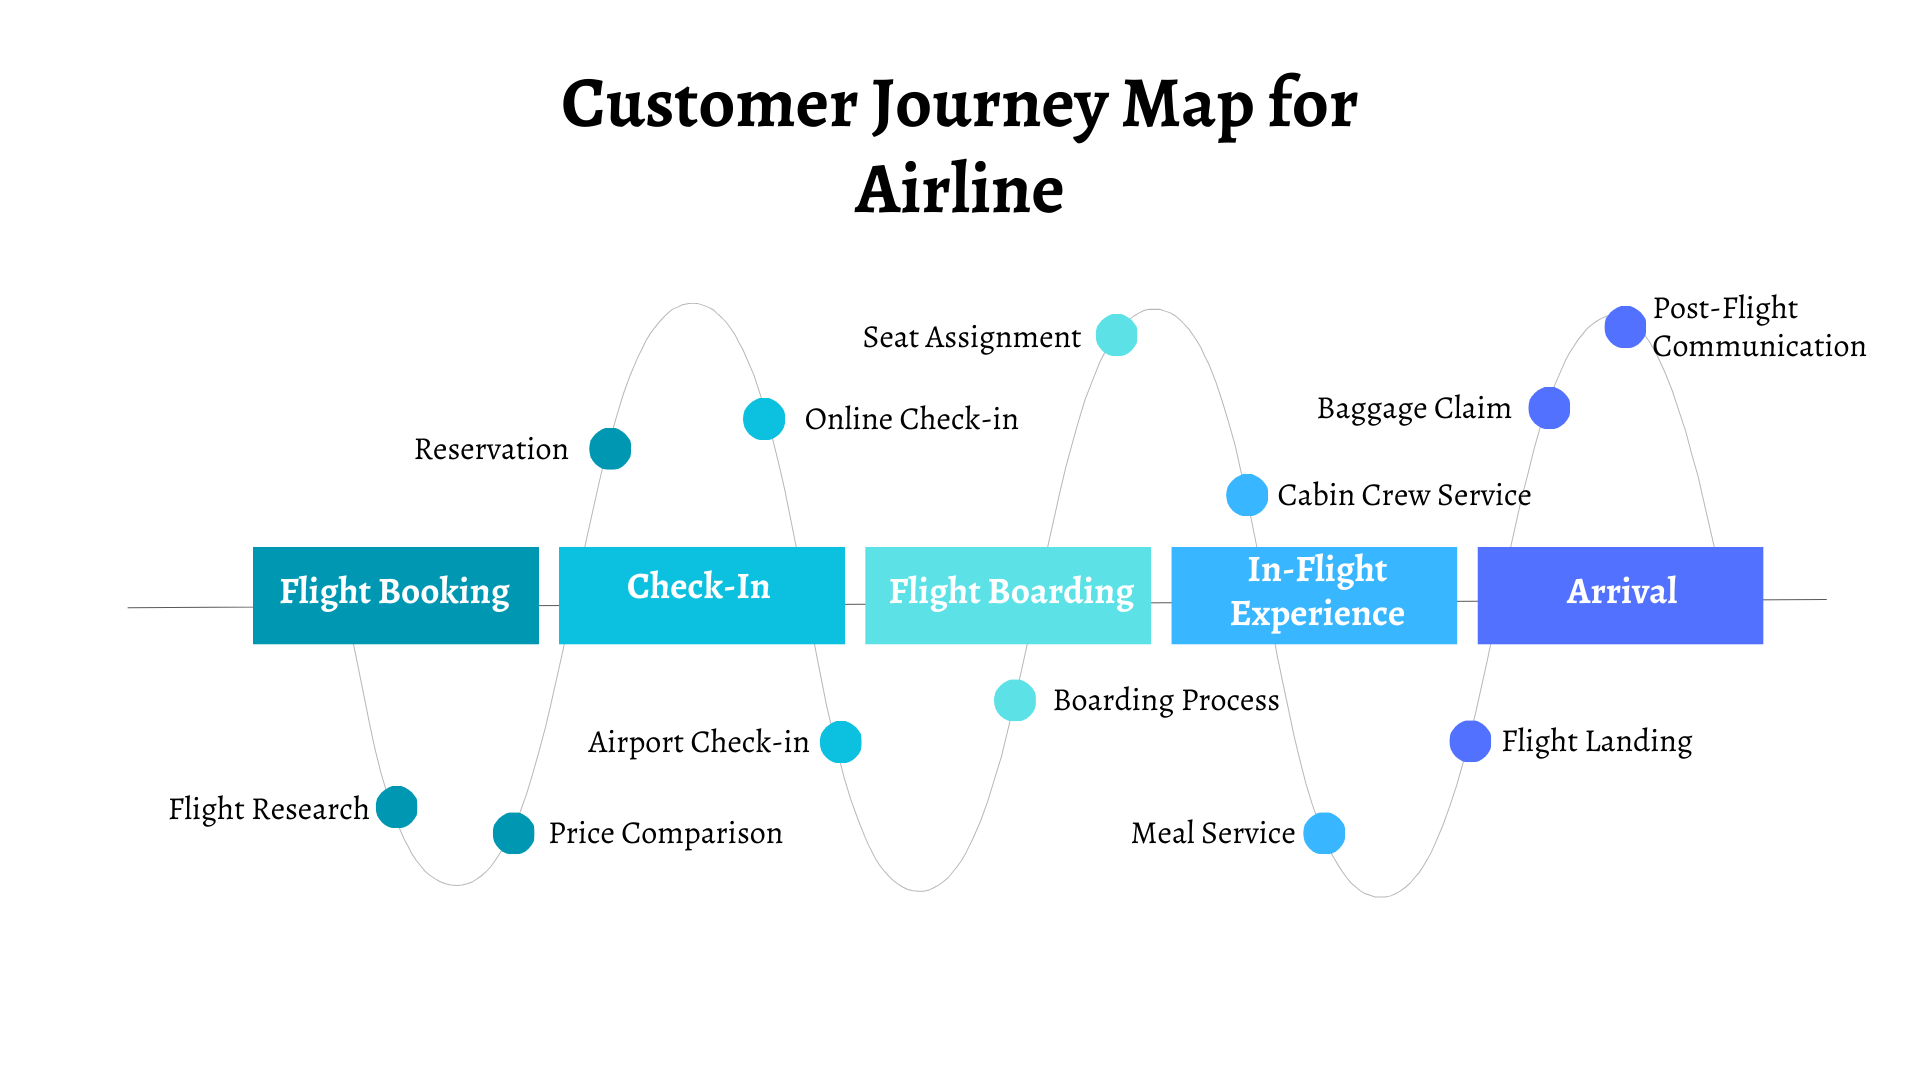 Customer Journey Map for Airline